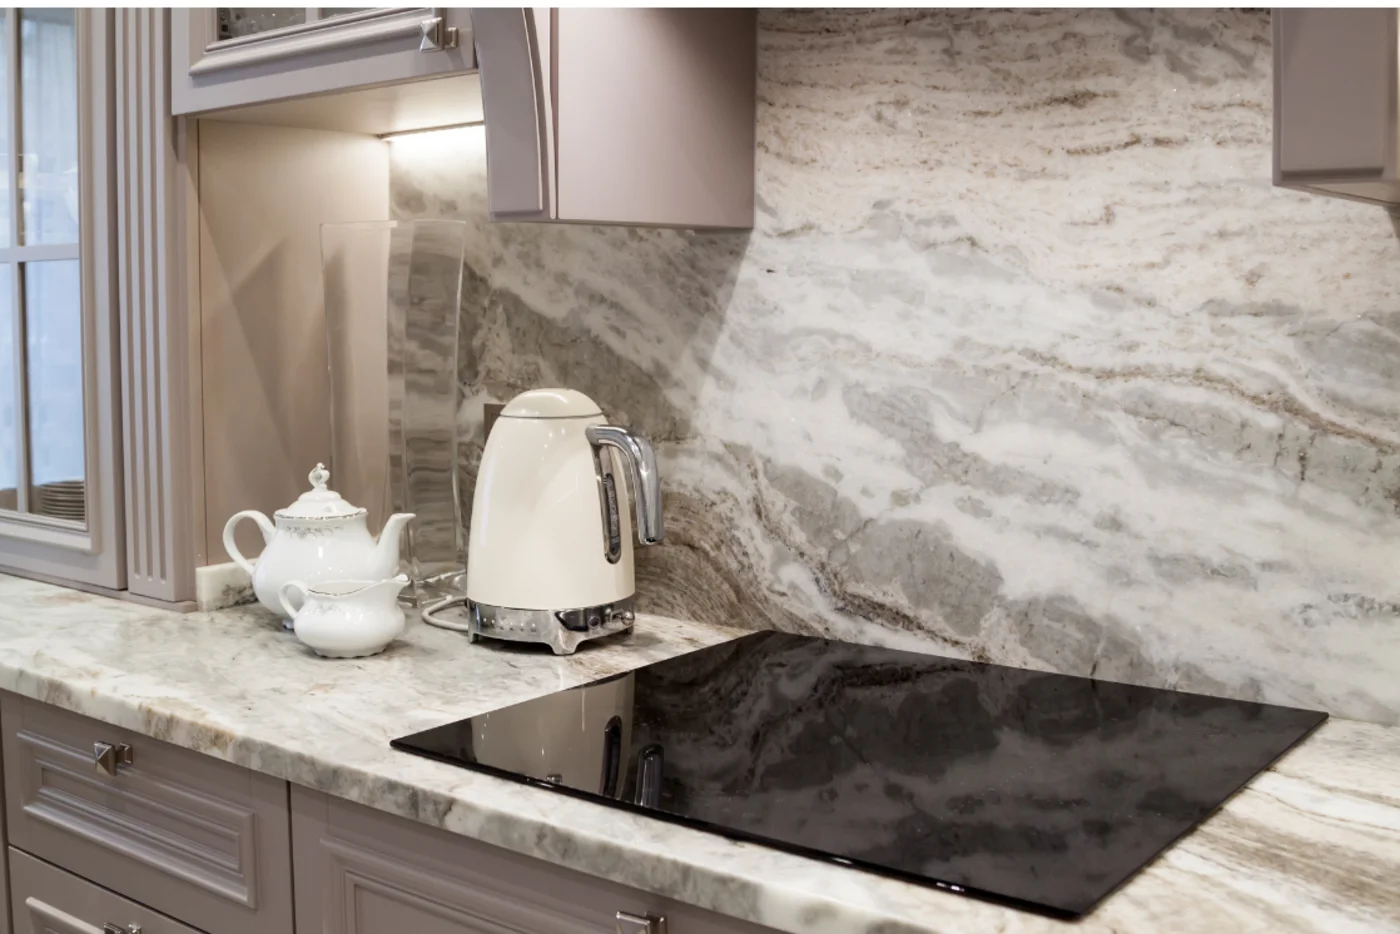 How to add value to your home. A grey kitchen worktop with a grey stone wall and a white kettle.